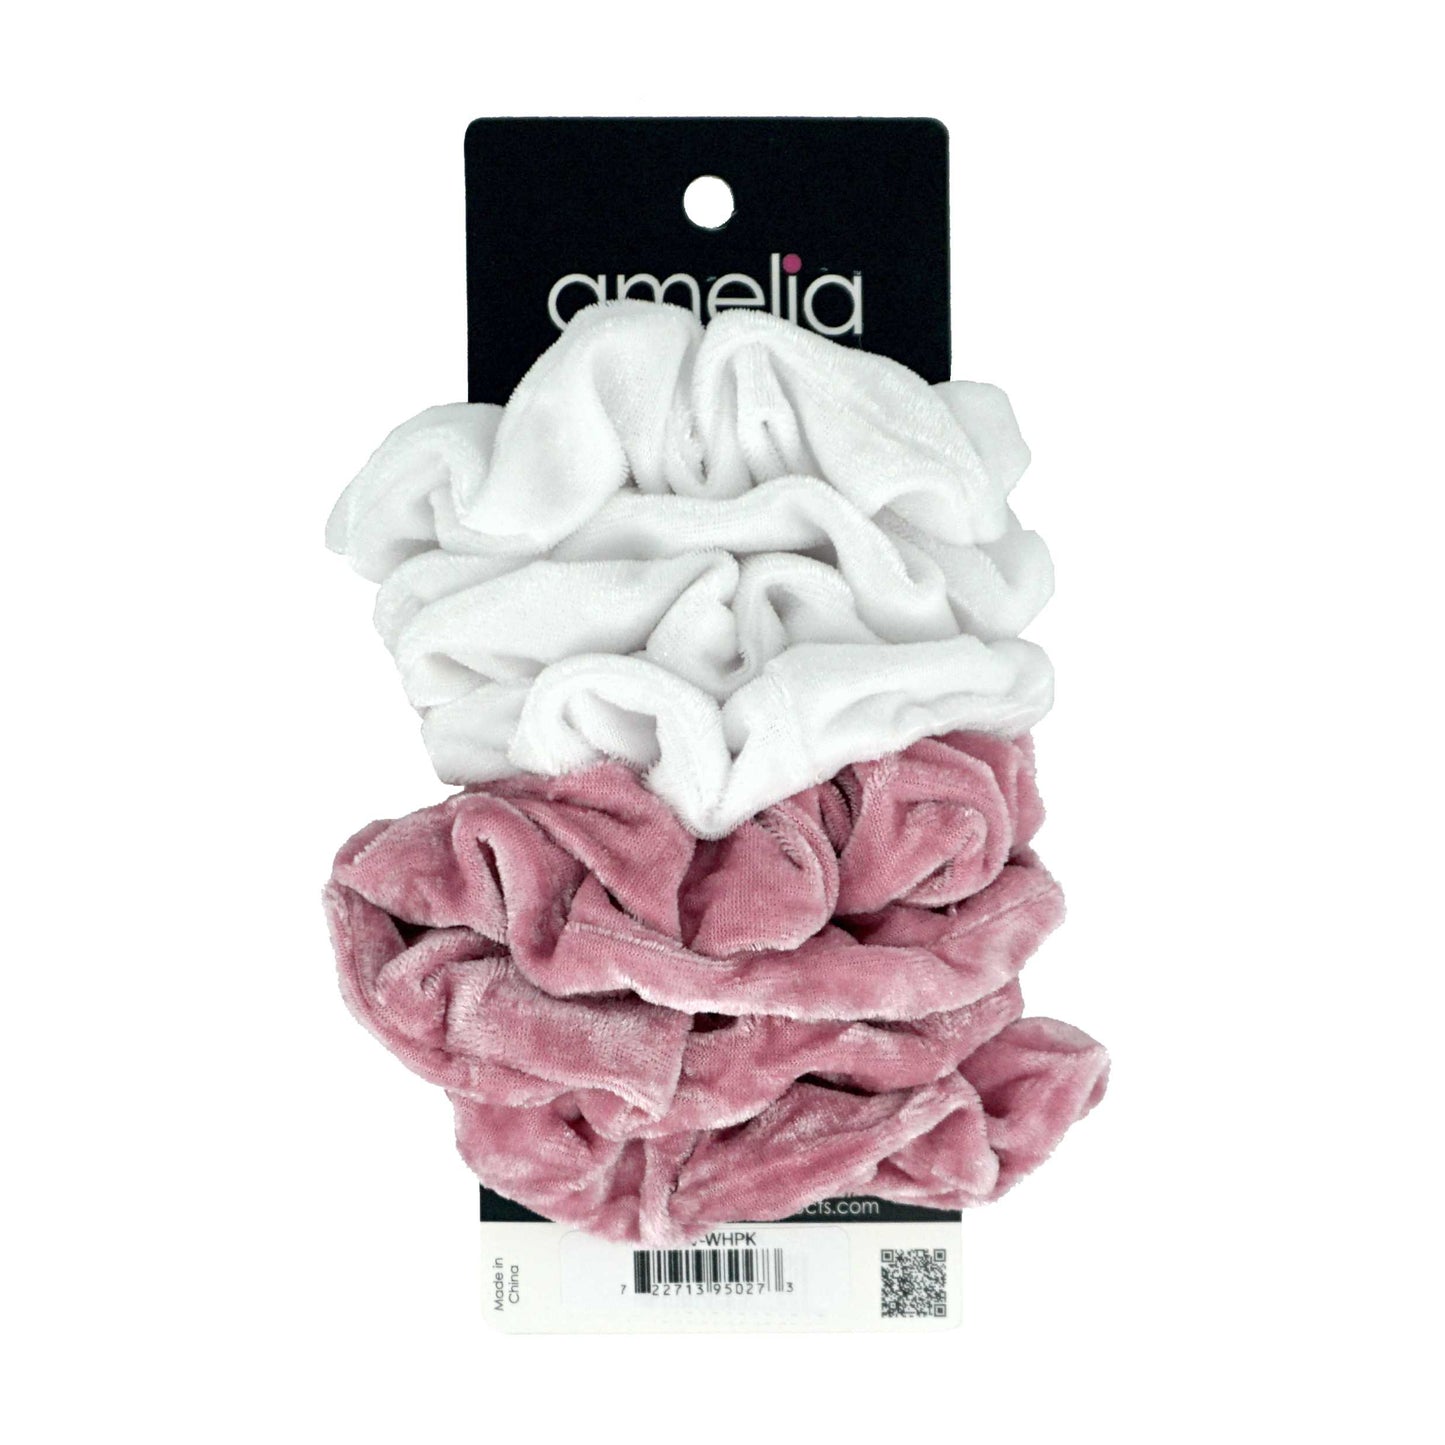 Amelia Beauty Products, White and Pink Velvet Velvet Scrunchies, 3.5in Diameter, Gentle on Hair, Strong Hold, No Snag, No Dents or Creases. 8 Pack